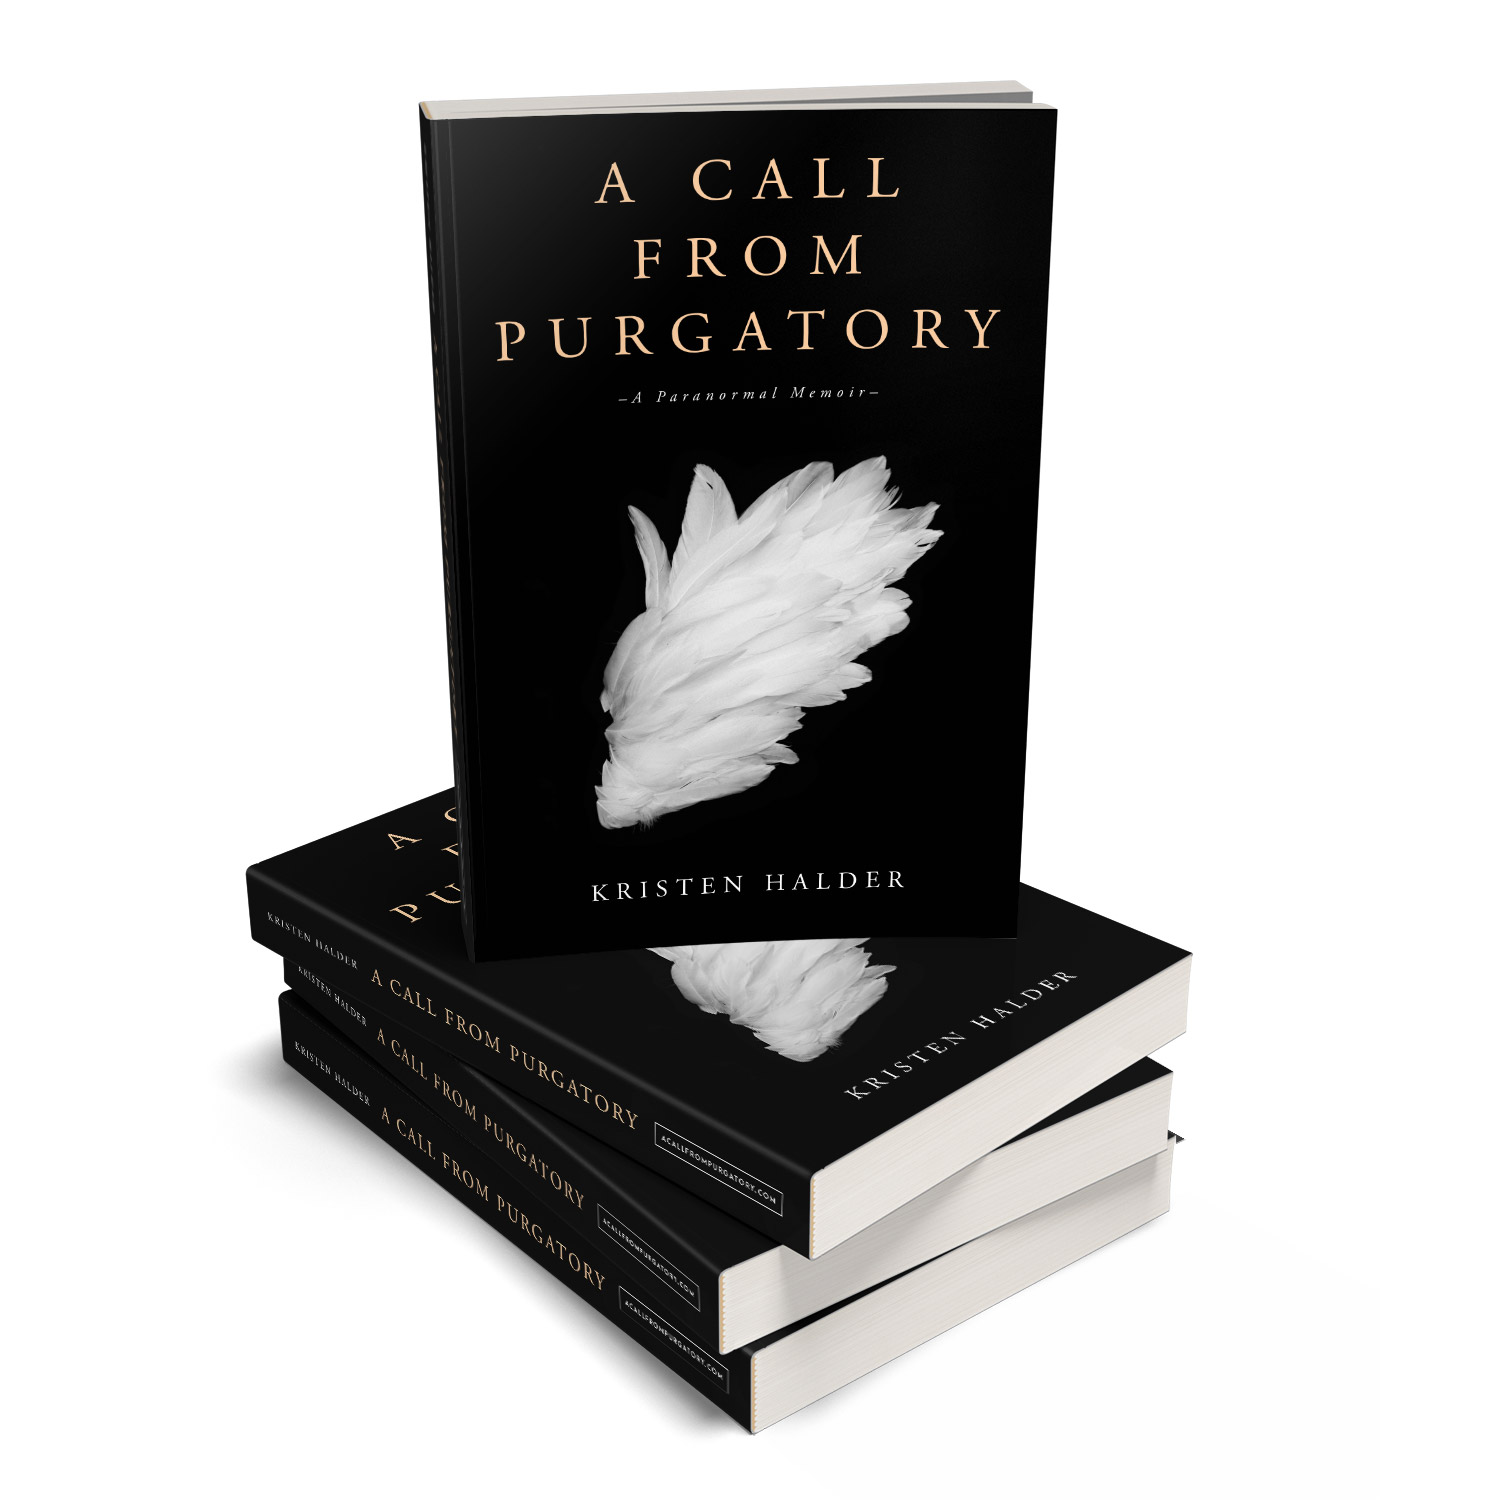 'A Call From Purgatory' is a chilling supernatural memoir. The author is Kristen Halder. The cover design & interior design of the series is by Mark Thomas. To learn more about what Mark could do for your book, please visit coverness.com